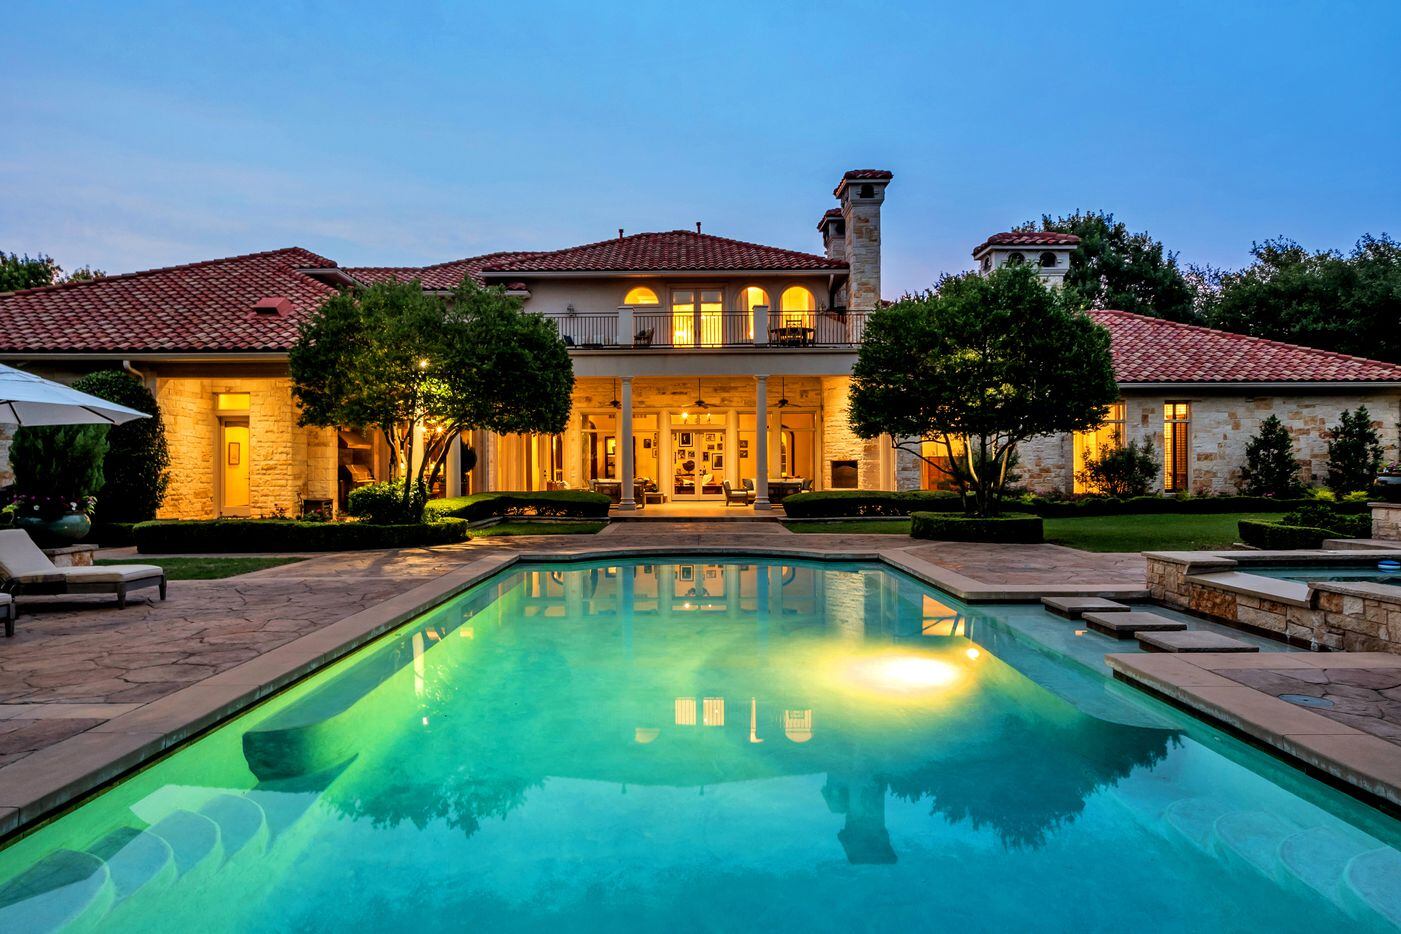 Take a look at the home at 5810 Park Lane in Dallas.